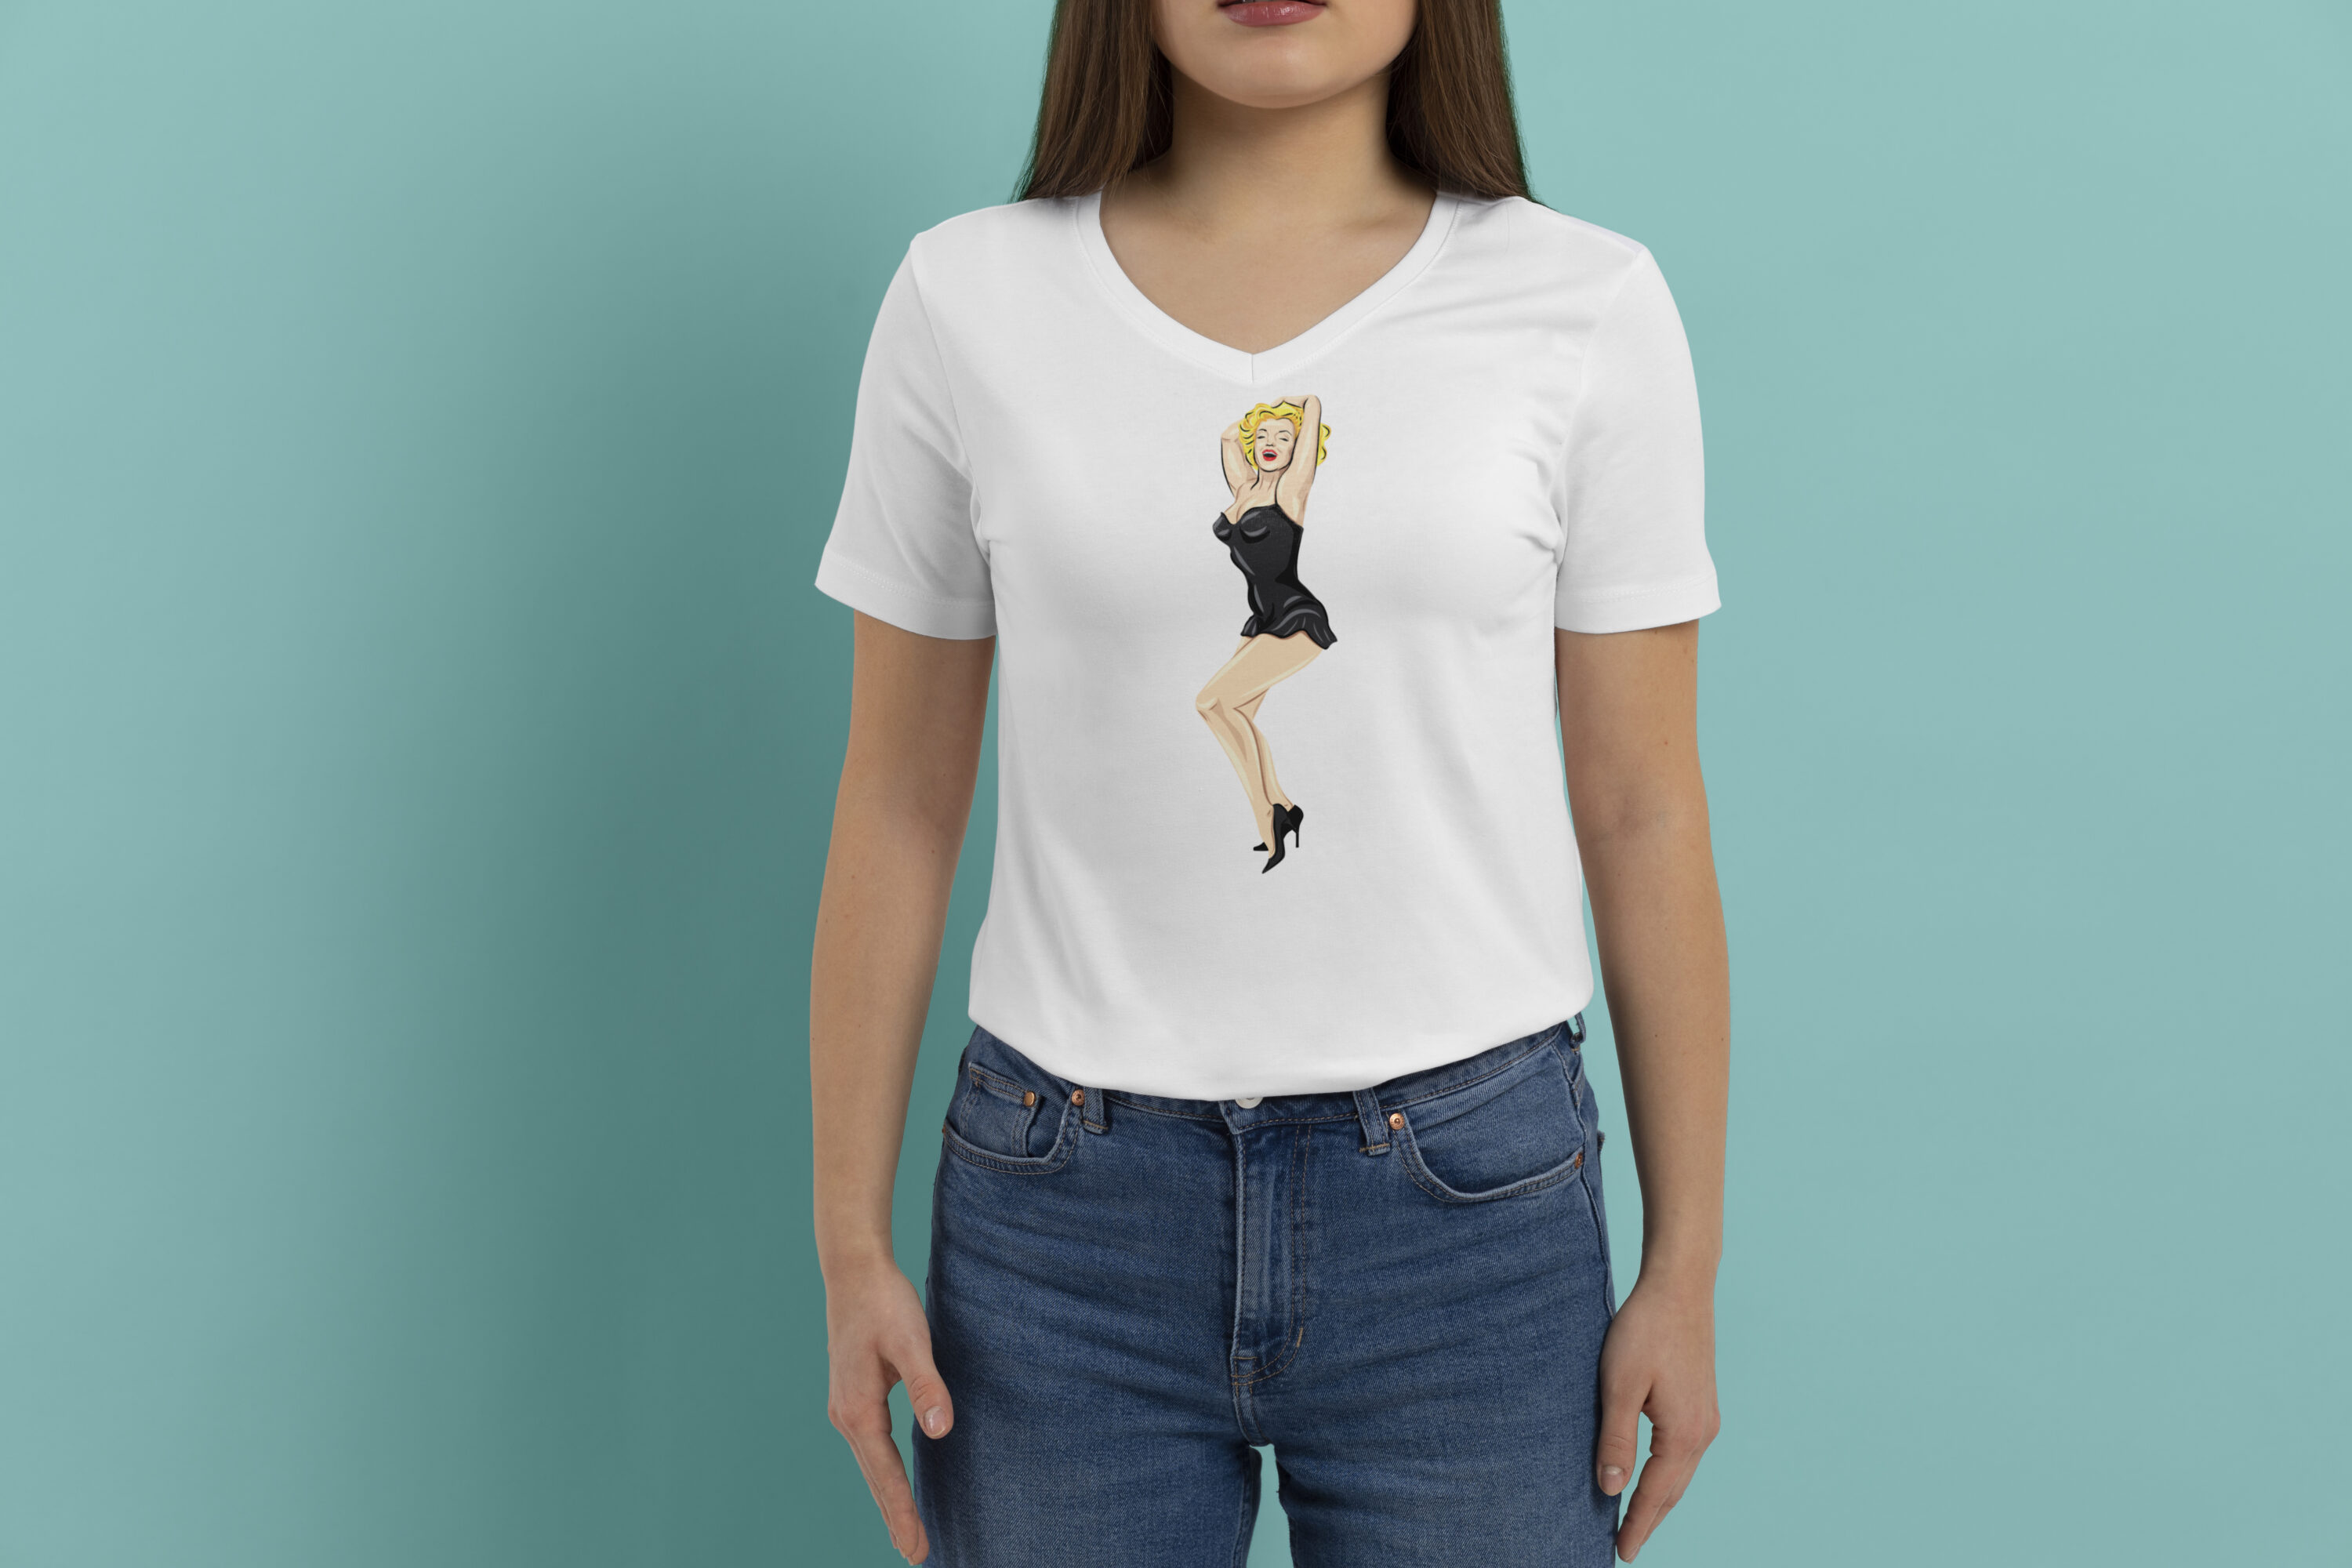 Image of a white t-shirt with marvelous Marilyn Monroe print.